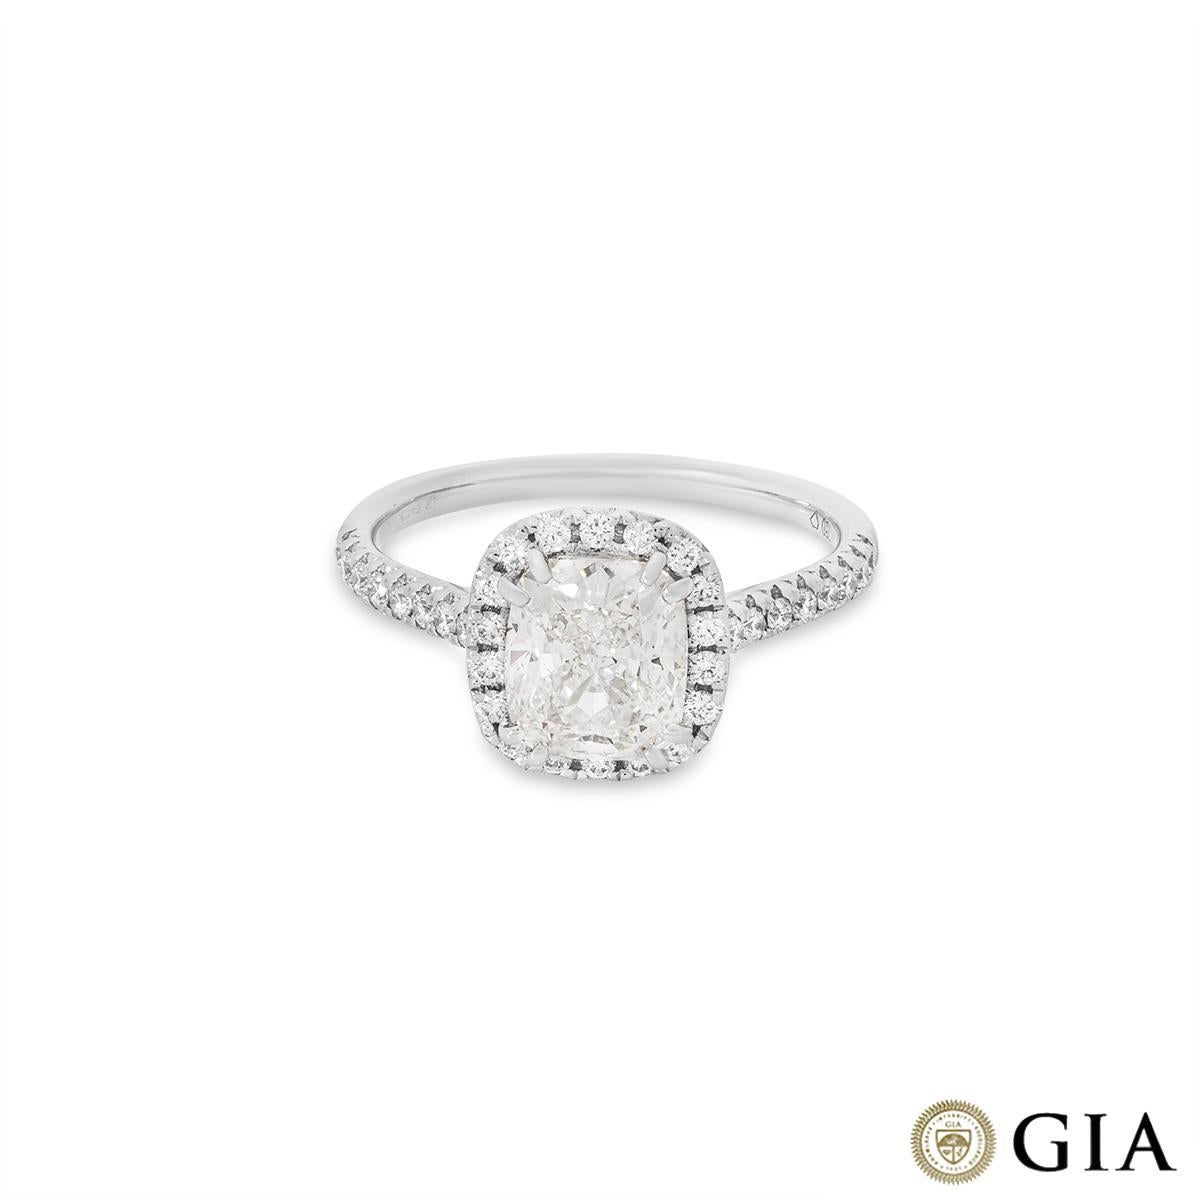 GIA Certified White Gold Cushion Cut Diamond Ring 1.81ct J/SI2 In New Condition For Sale In London, GB